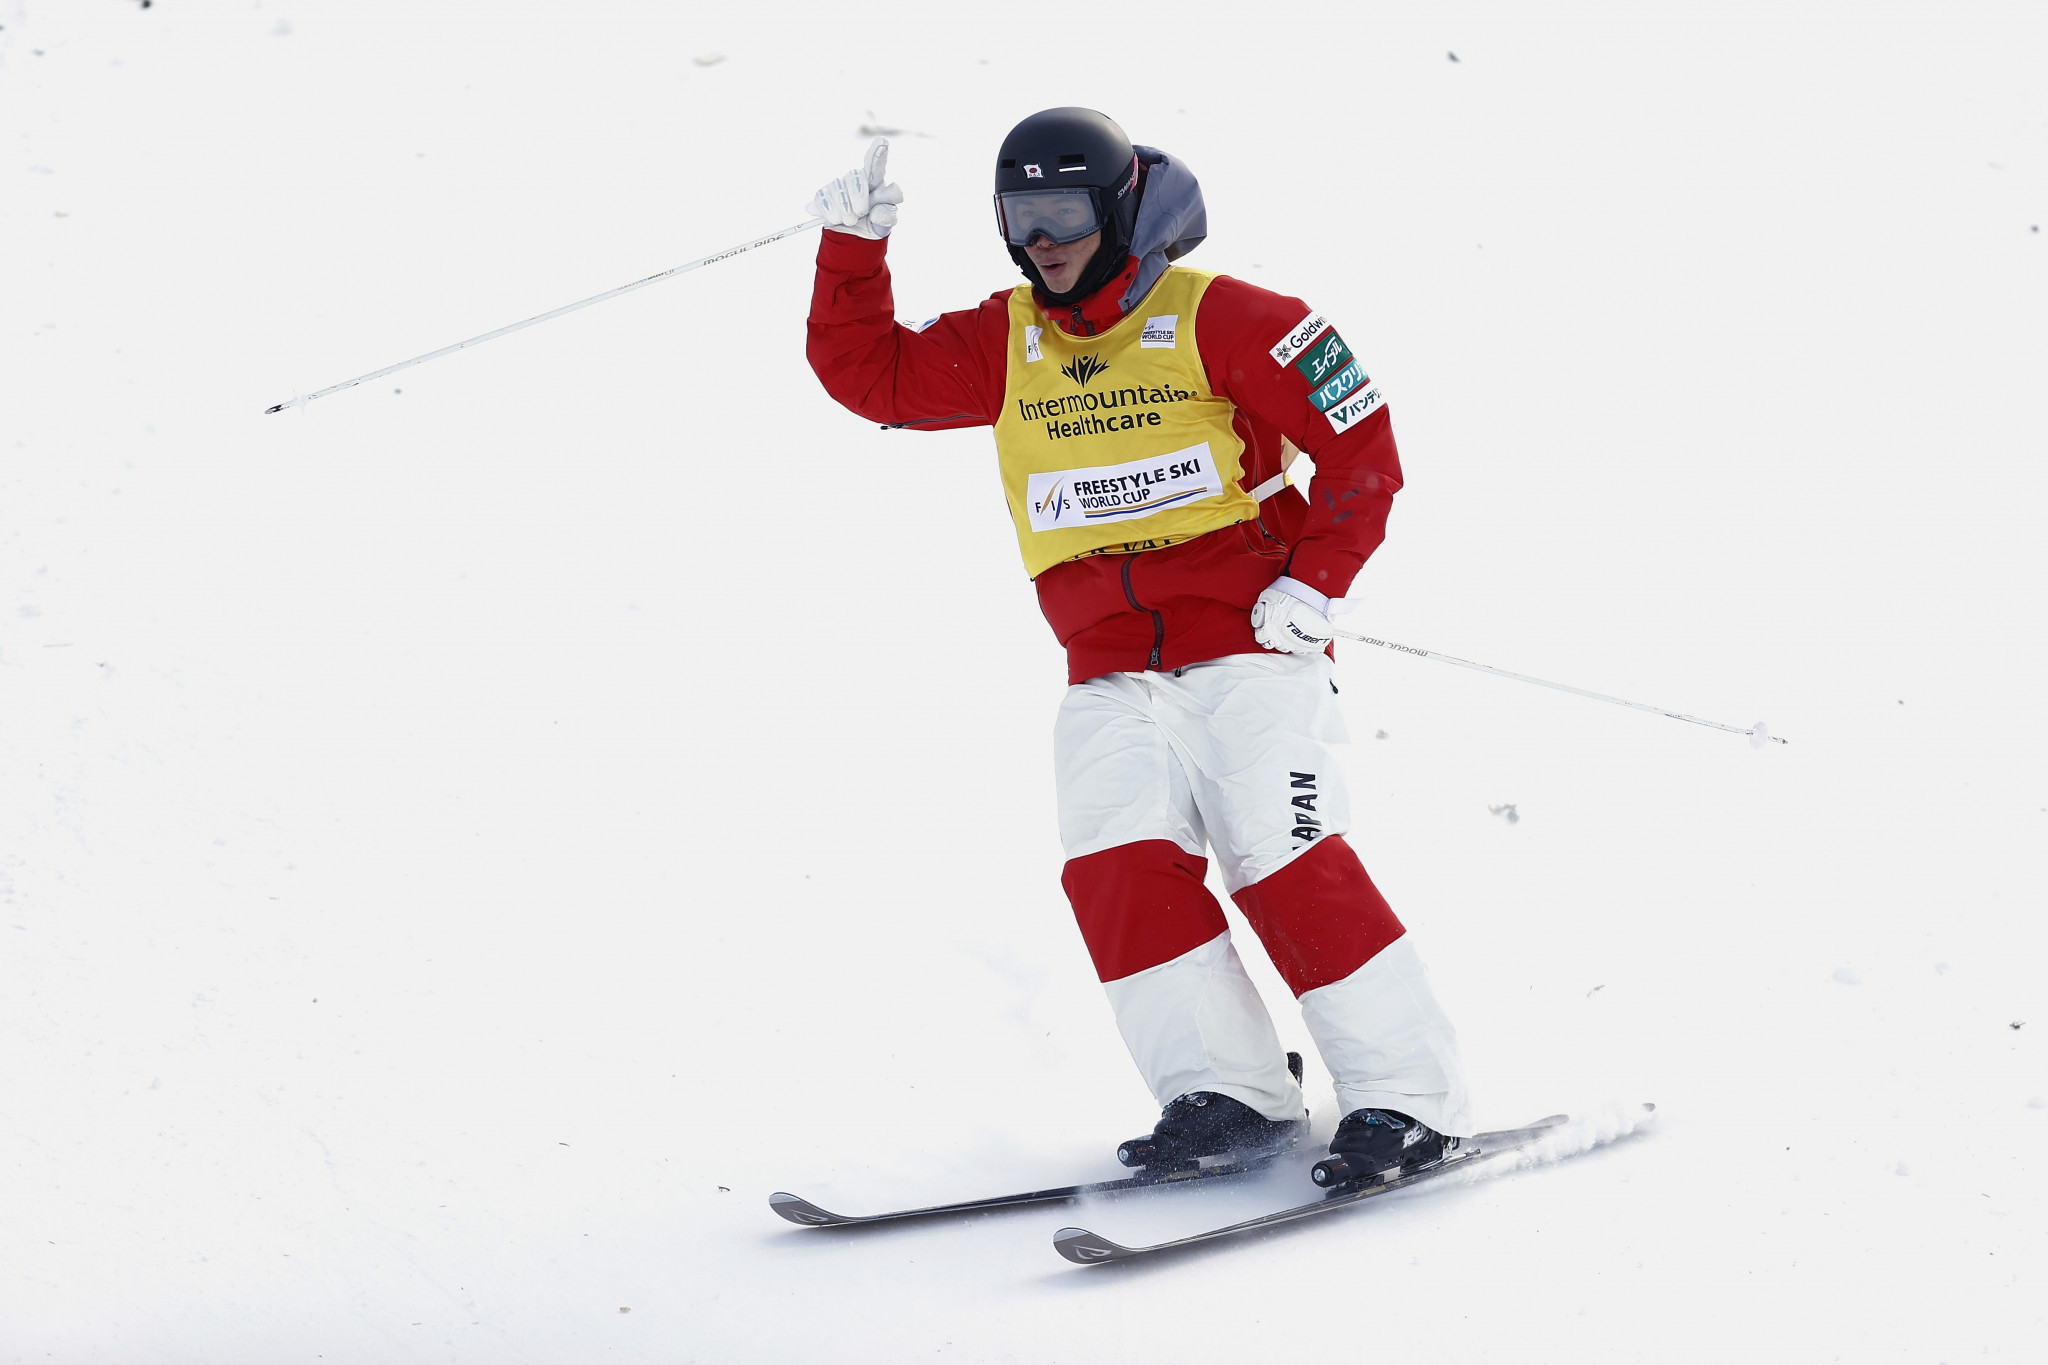 Double delight for Japan at FIS Moguls World Cup in Sweden